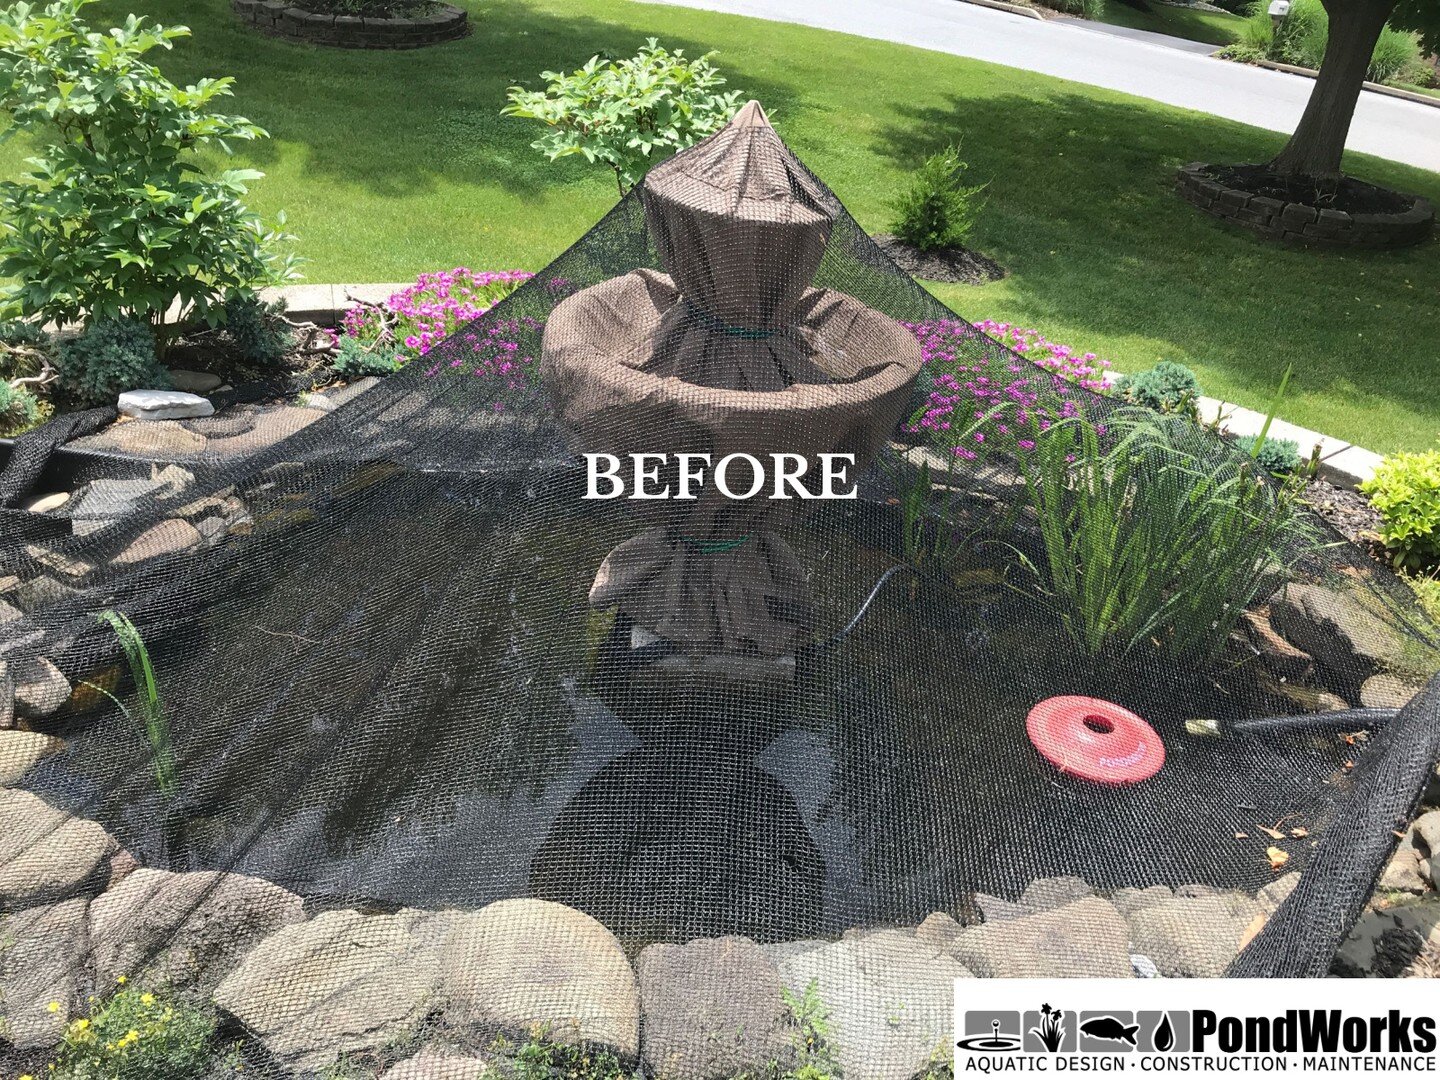 Slide right for a fantastic finish! 

Less than a week before we hit the ground running with our Spring Cleaning Services and we are pumped!
See you all soon!

#pondworks #springcleaning #spring #plants #design #natural #yard #nature #waterfeature #w